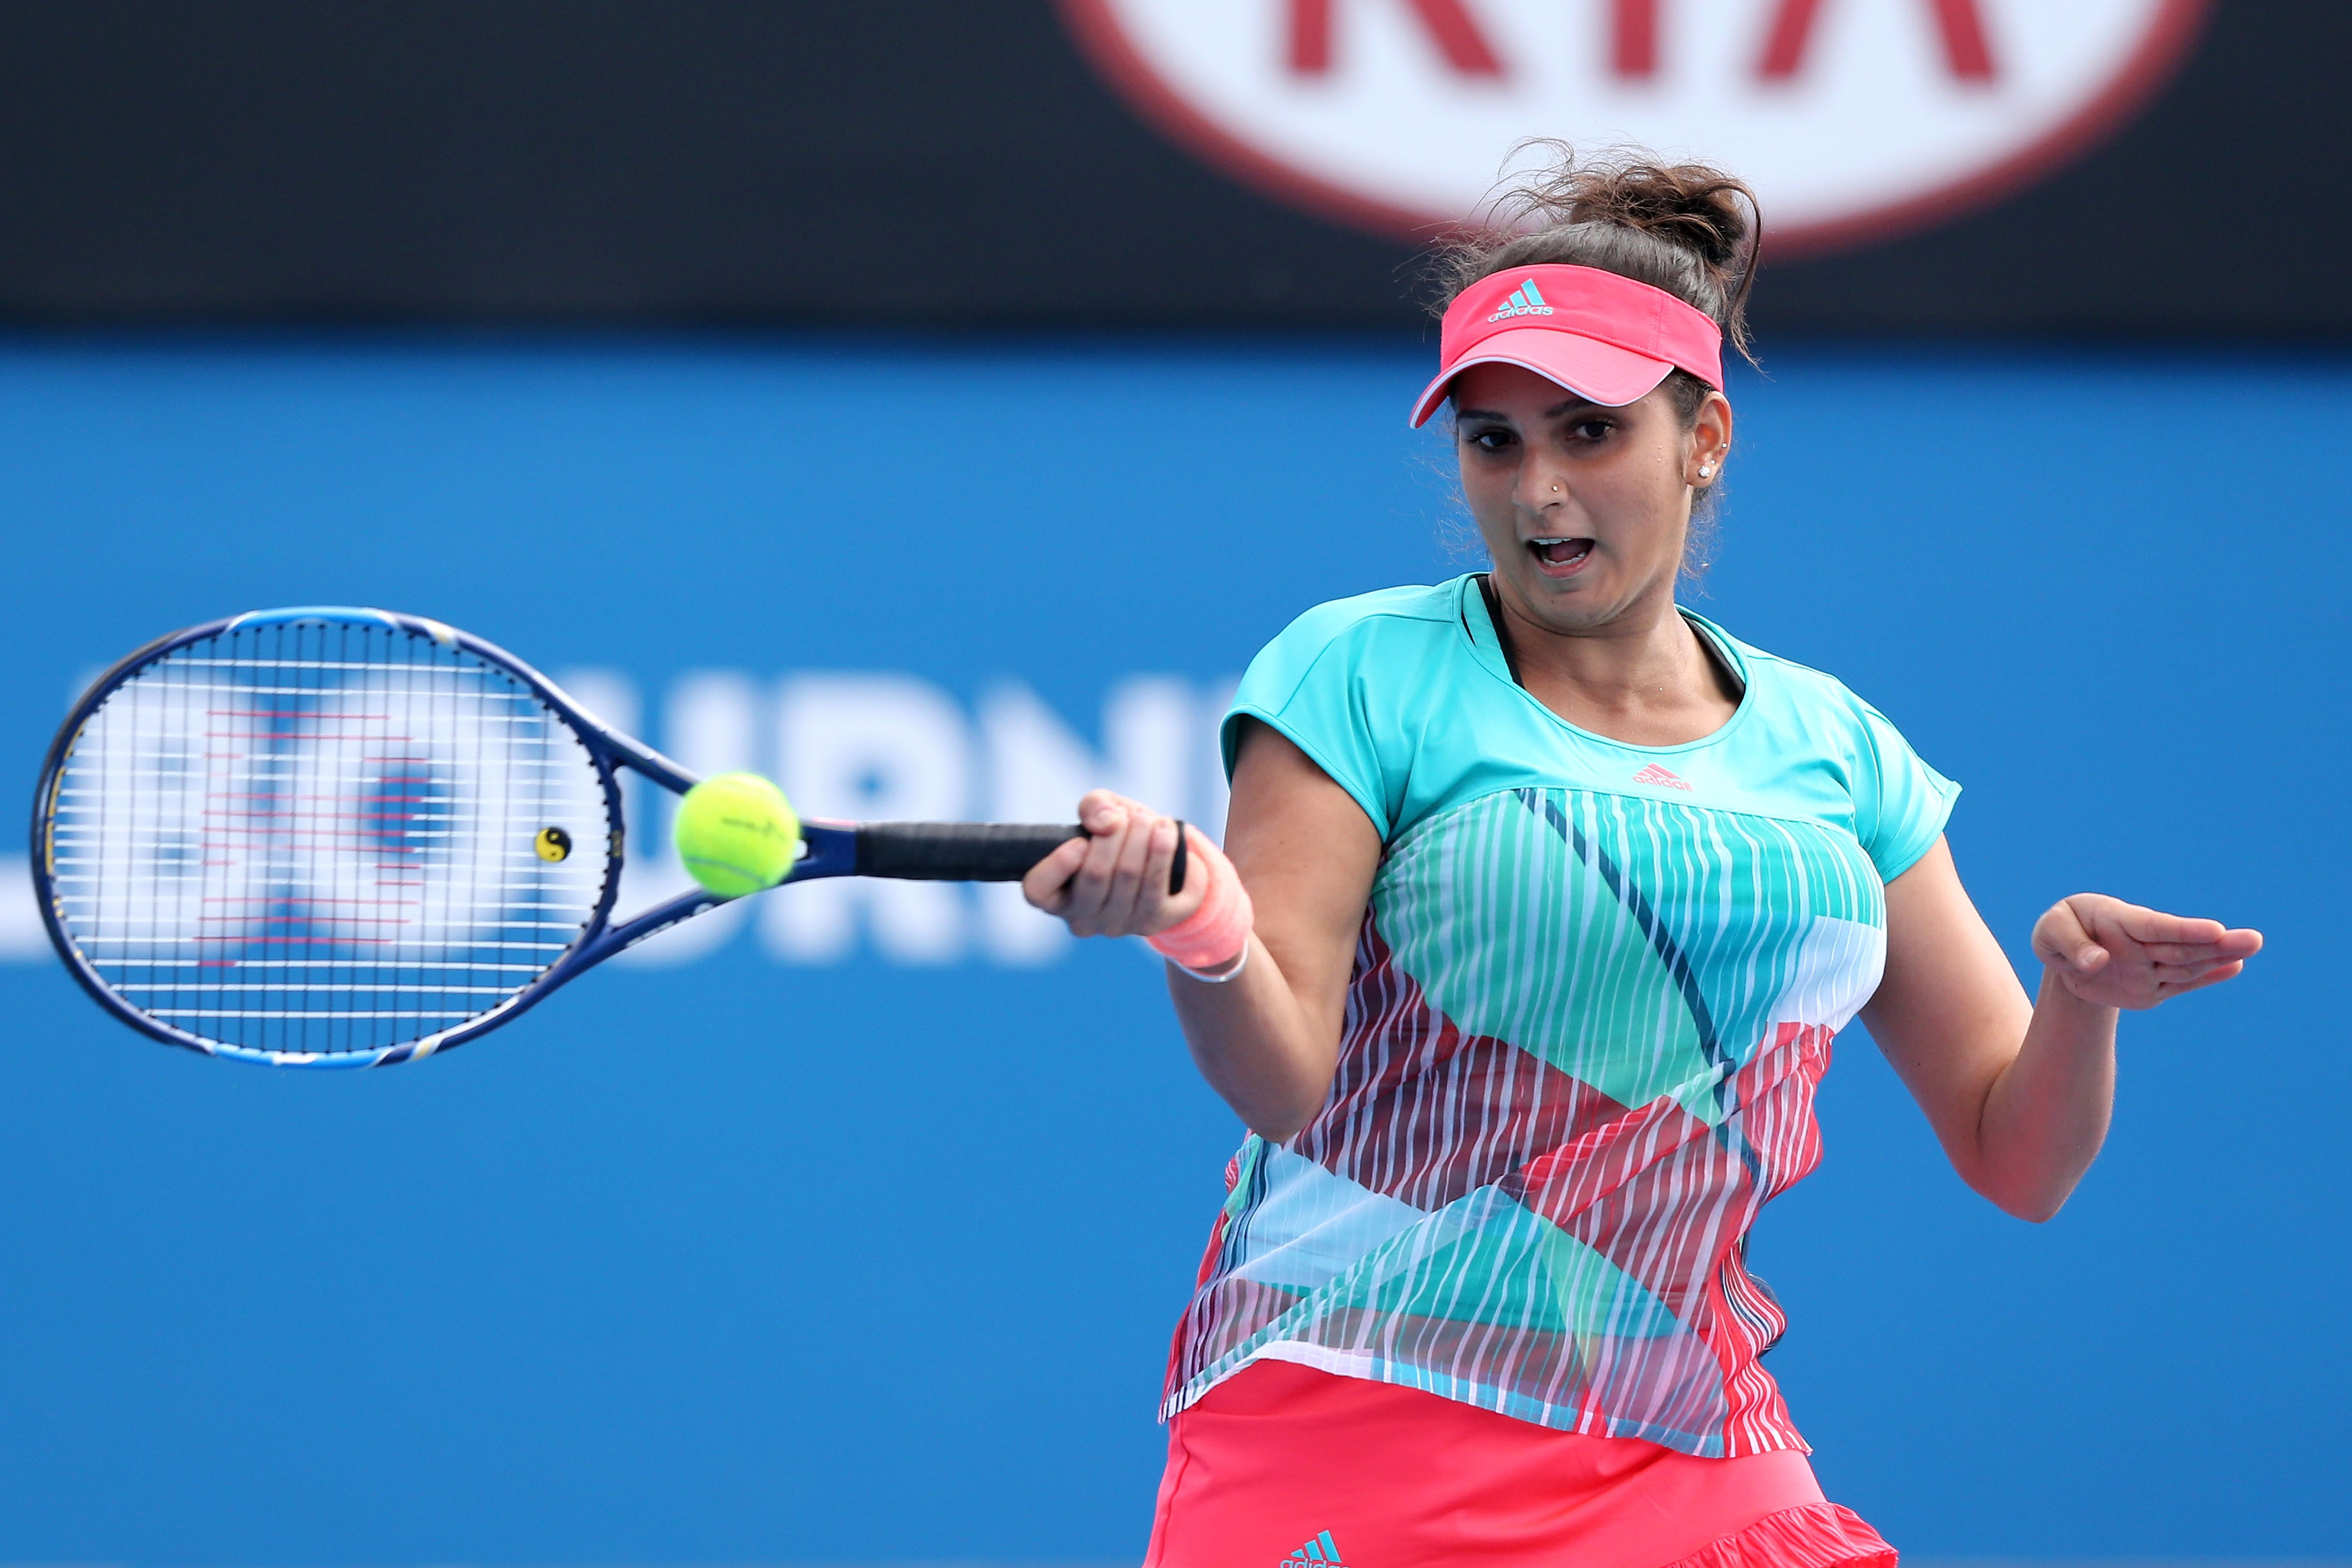 US Open | Sania Mirza enters doubles semifinals; Sloane Stephens to face Madison Keys for women’s singles title